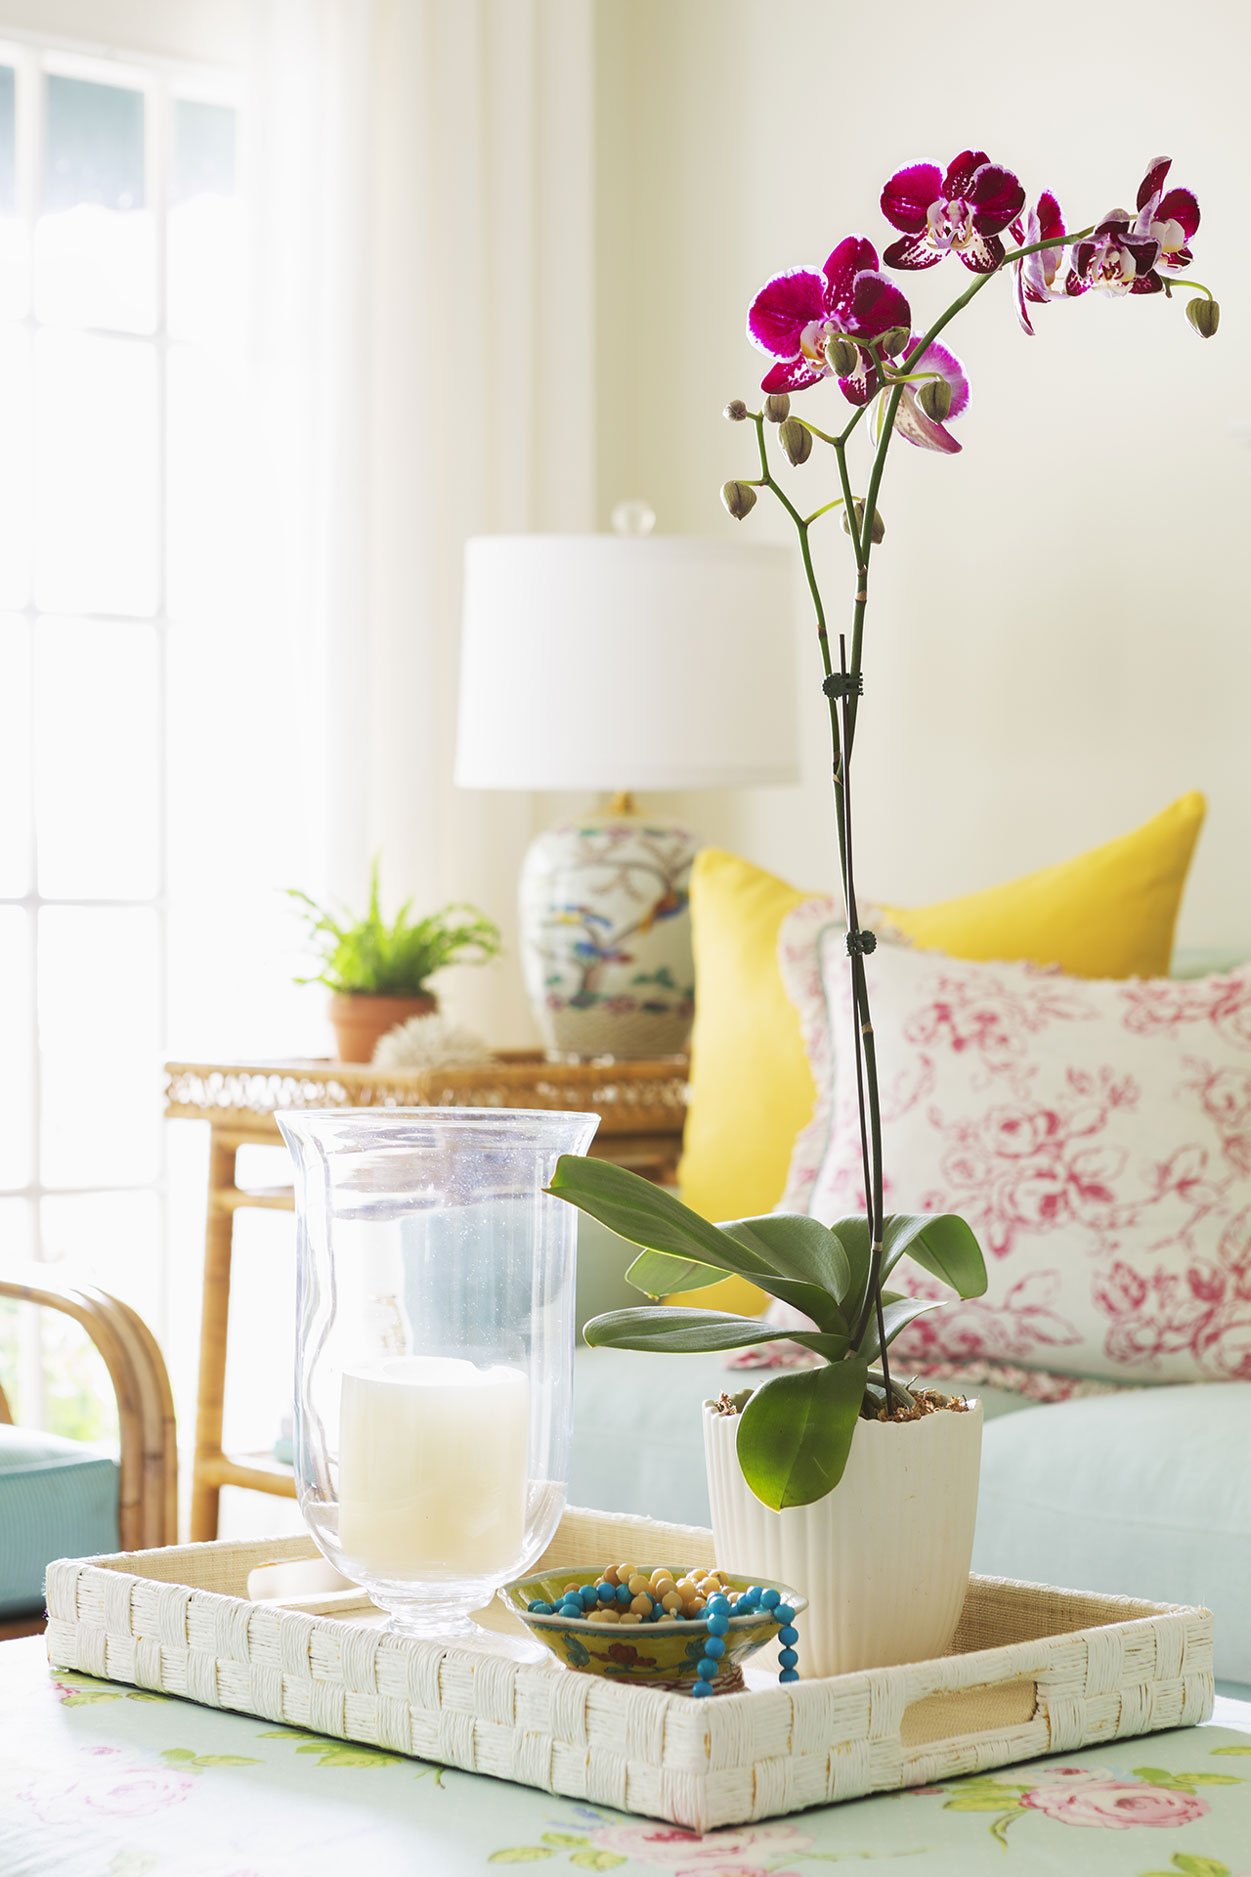 Borough Shores - Susan Walsh Interiors - Photographed by Rett Peek for At Home in Arkansas magazine - 3 Orchid .jpg